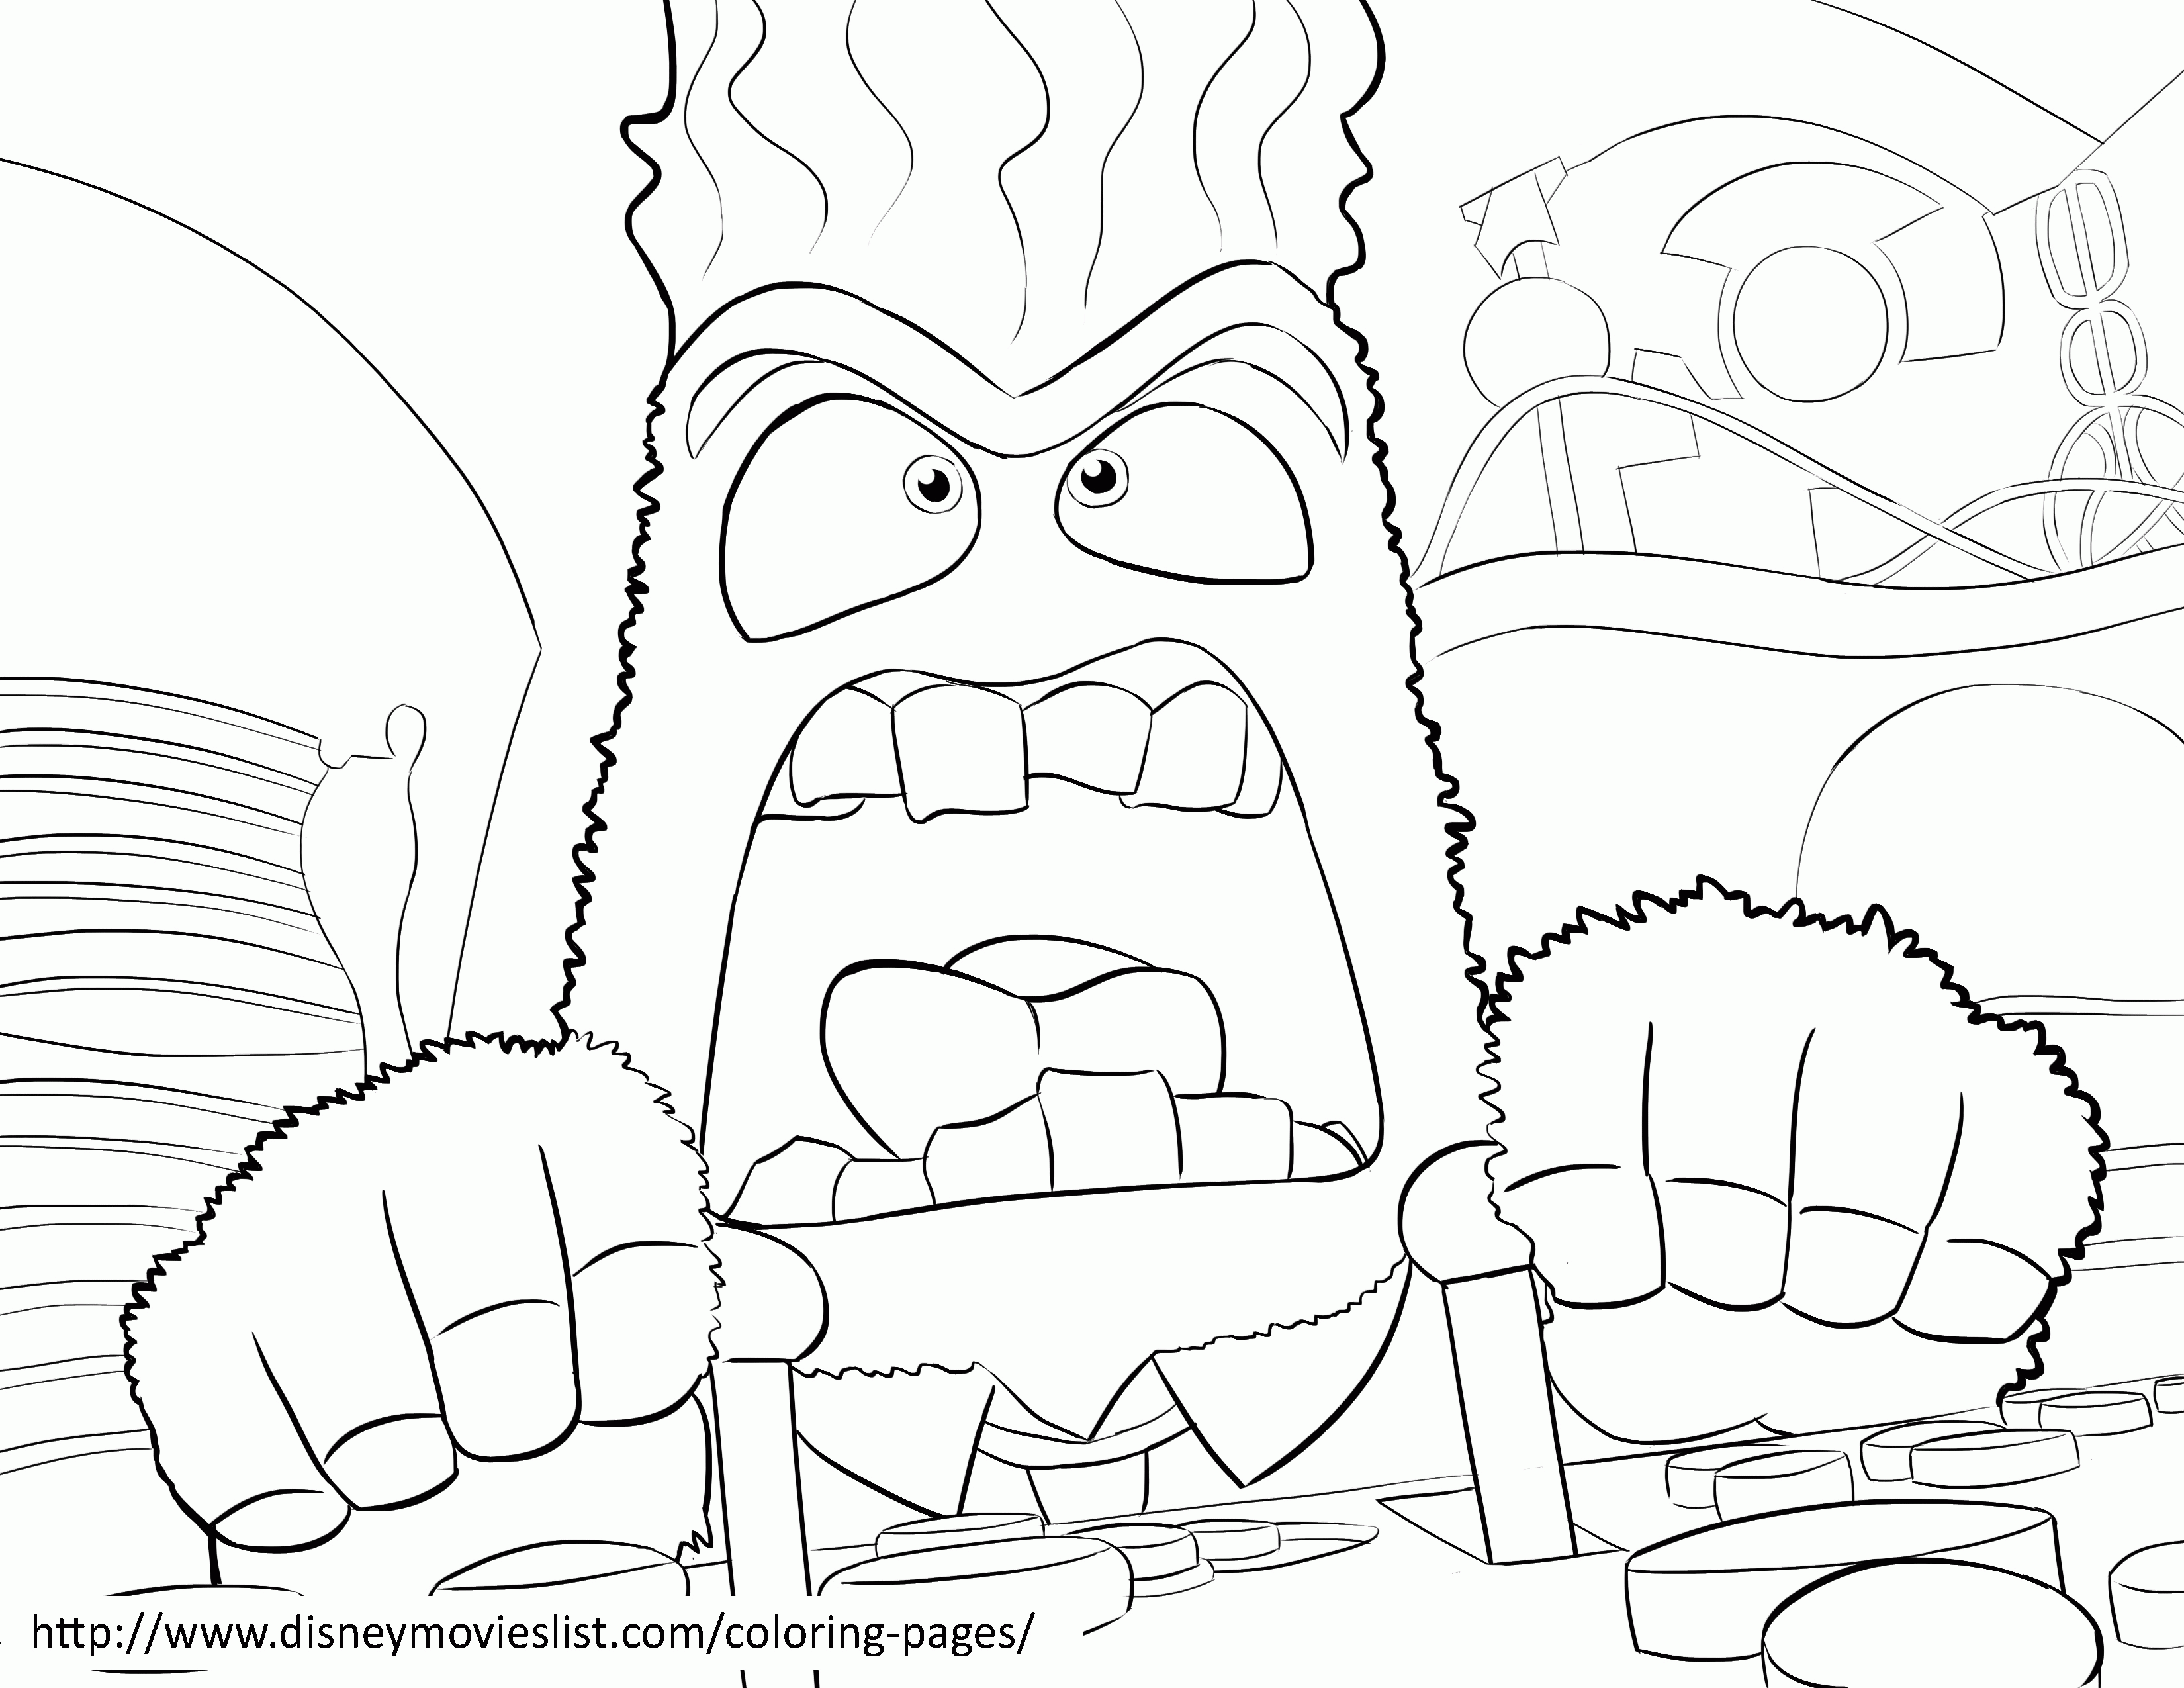 Anger - Disney's Inside Out Coloring Page